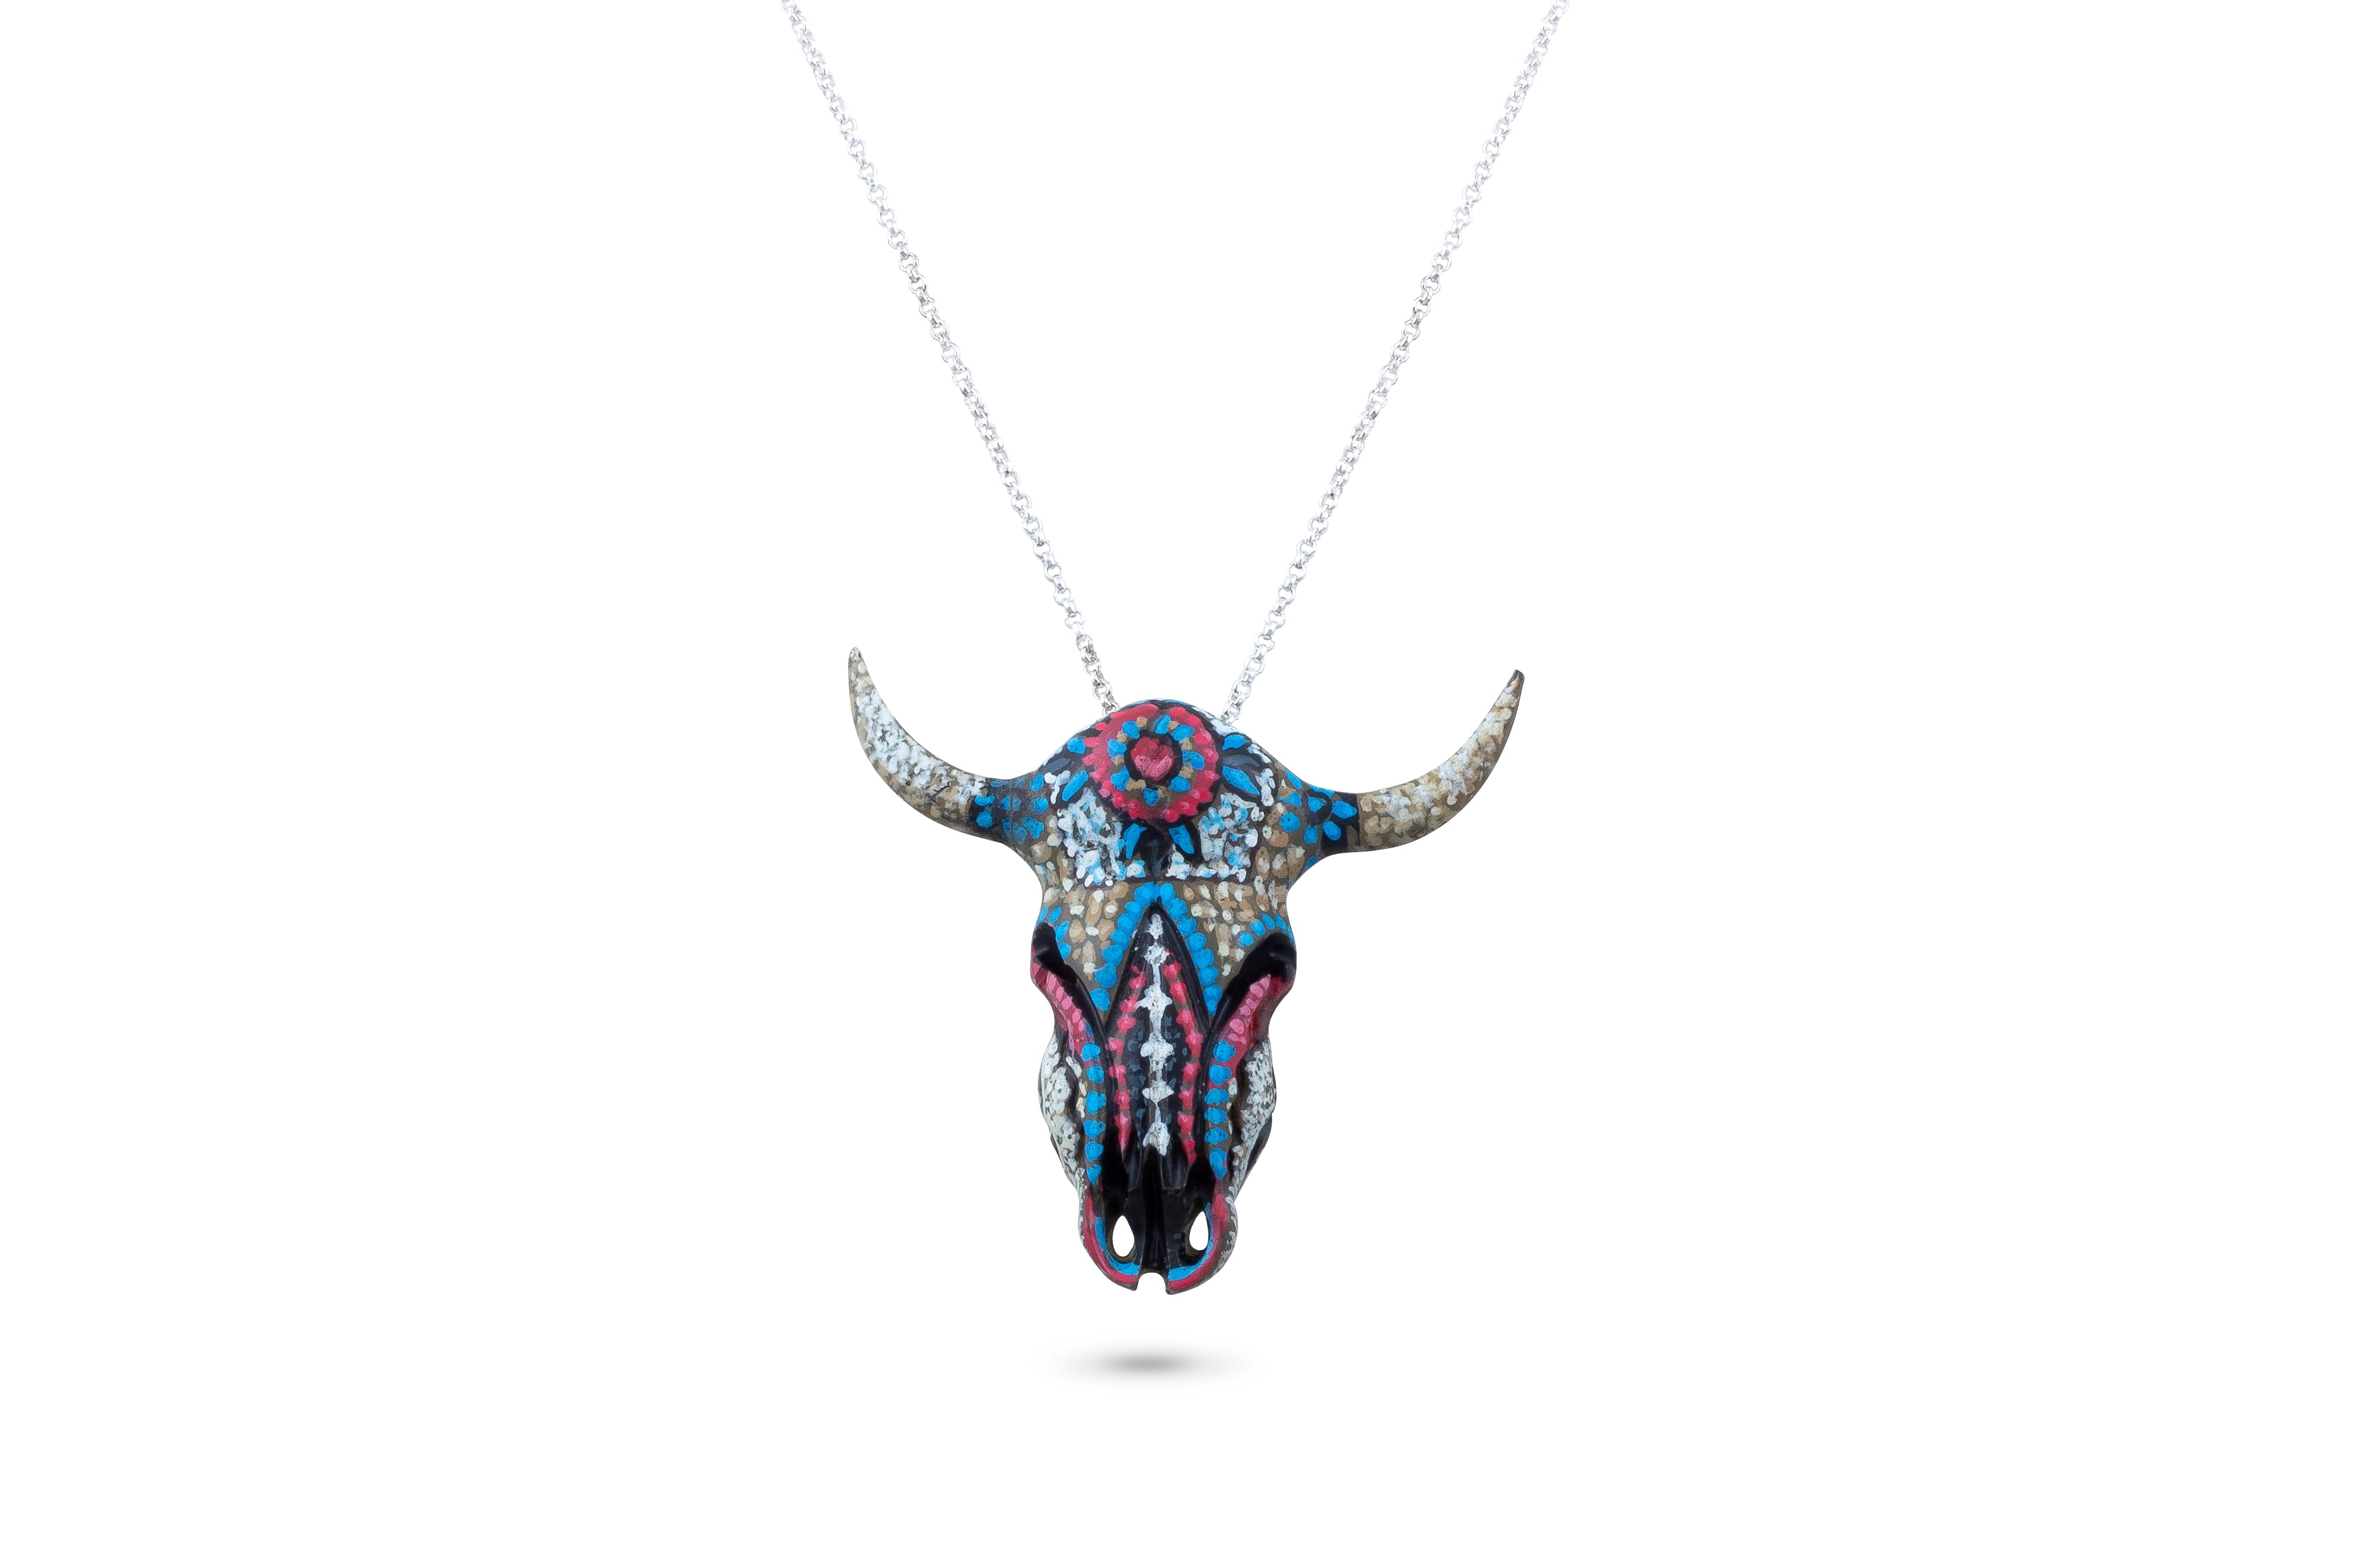 Incredible Vintage Carved Cow Skull Pendant - Woven Earth